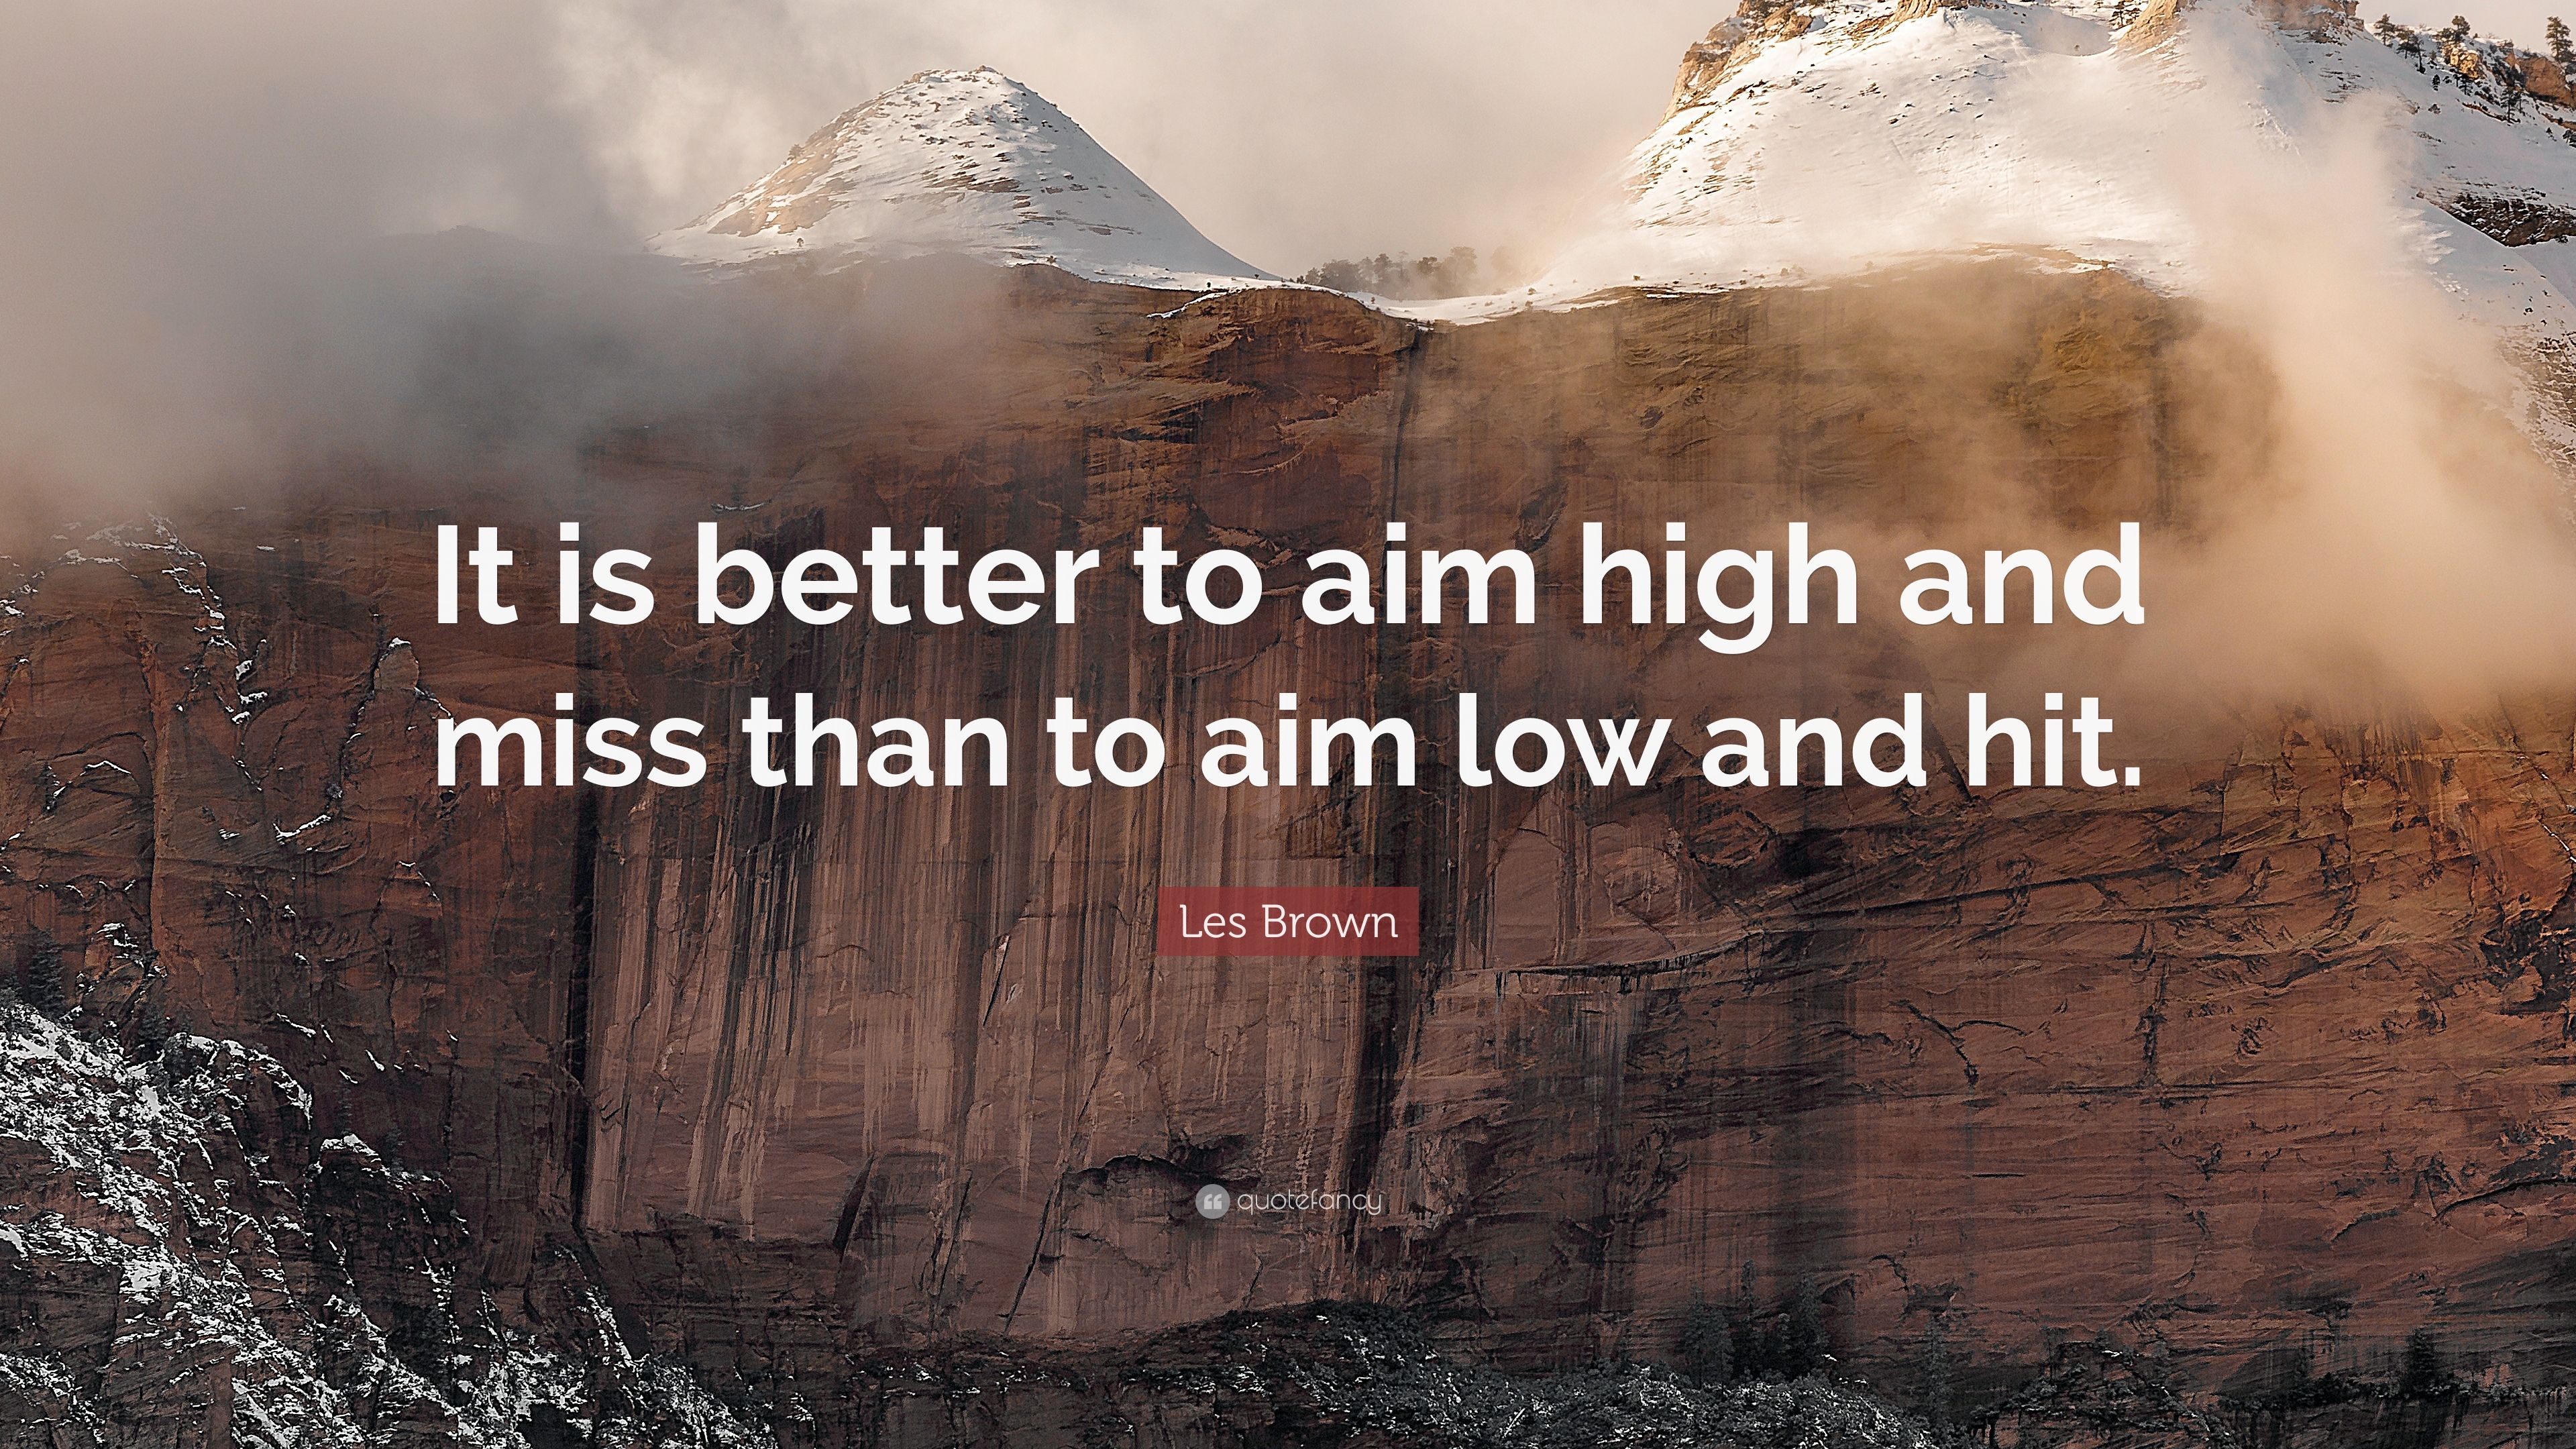 Les Brown Quote: “It is better to aim high and miss than to aim